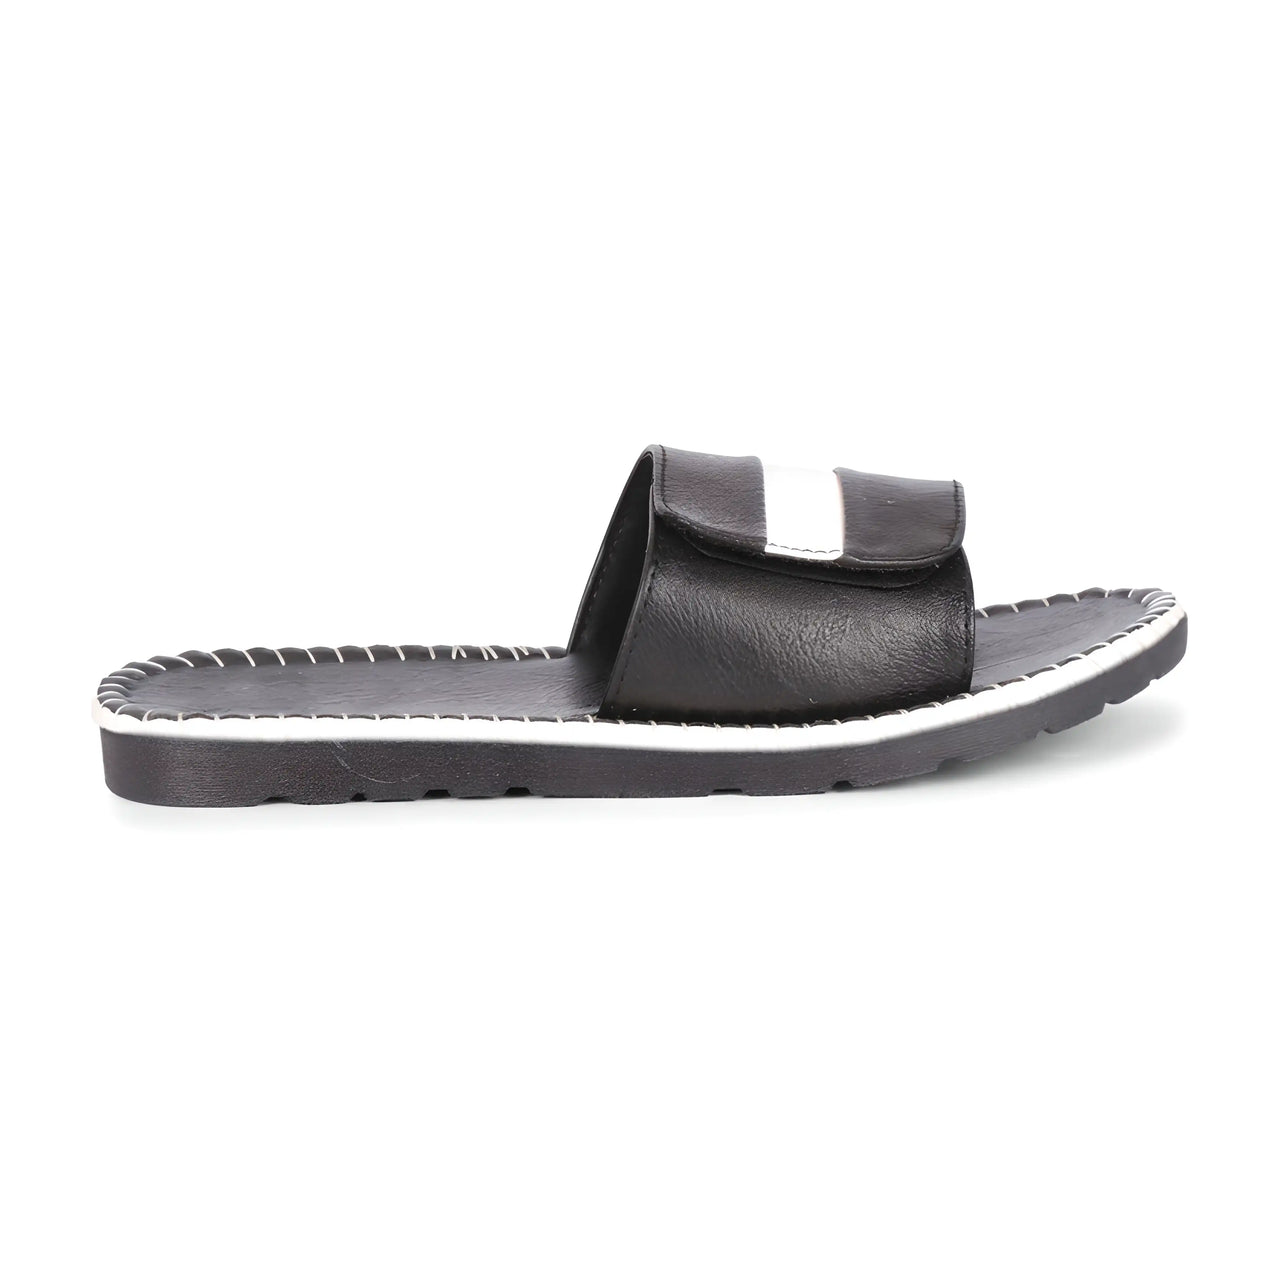 Castoes Trendy Fashionable Slippers for Men